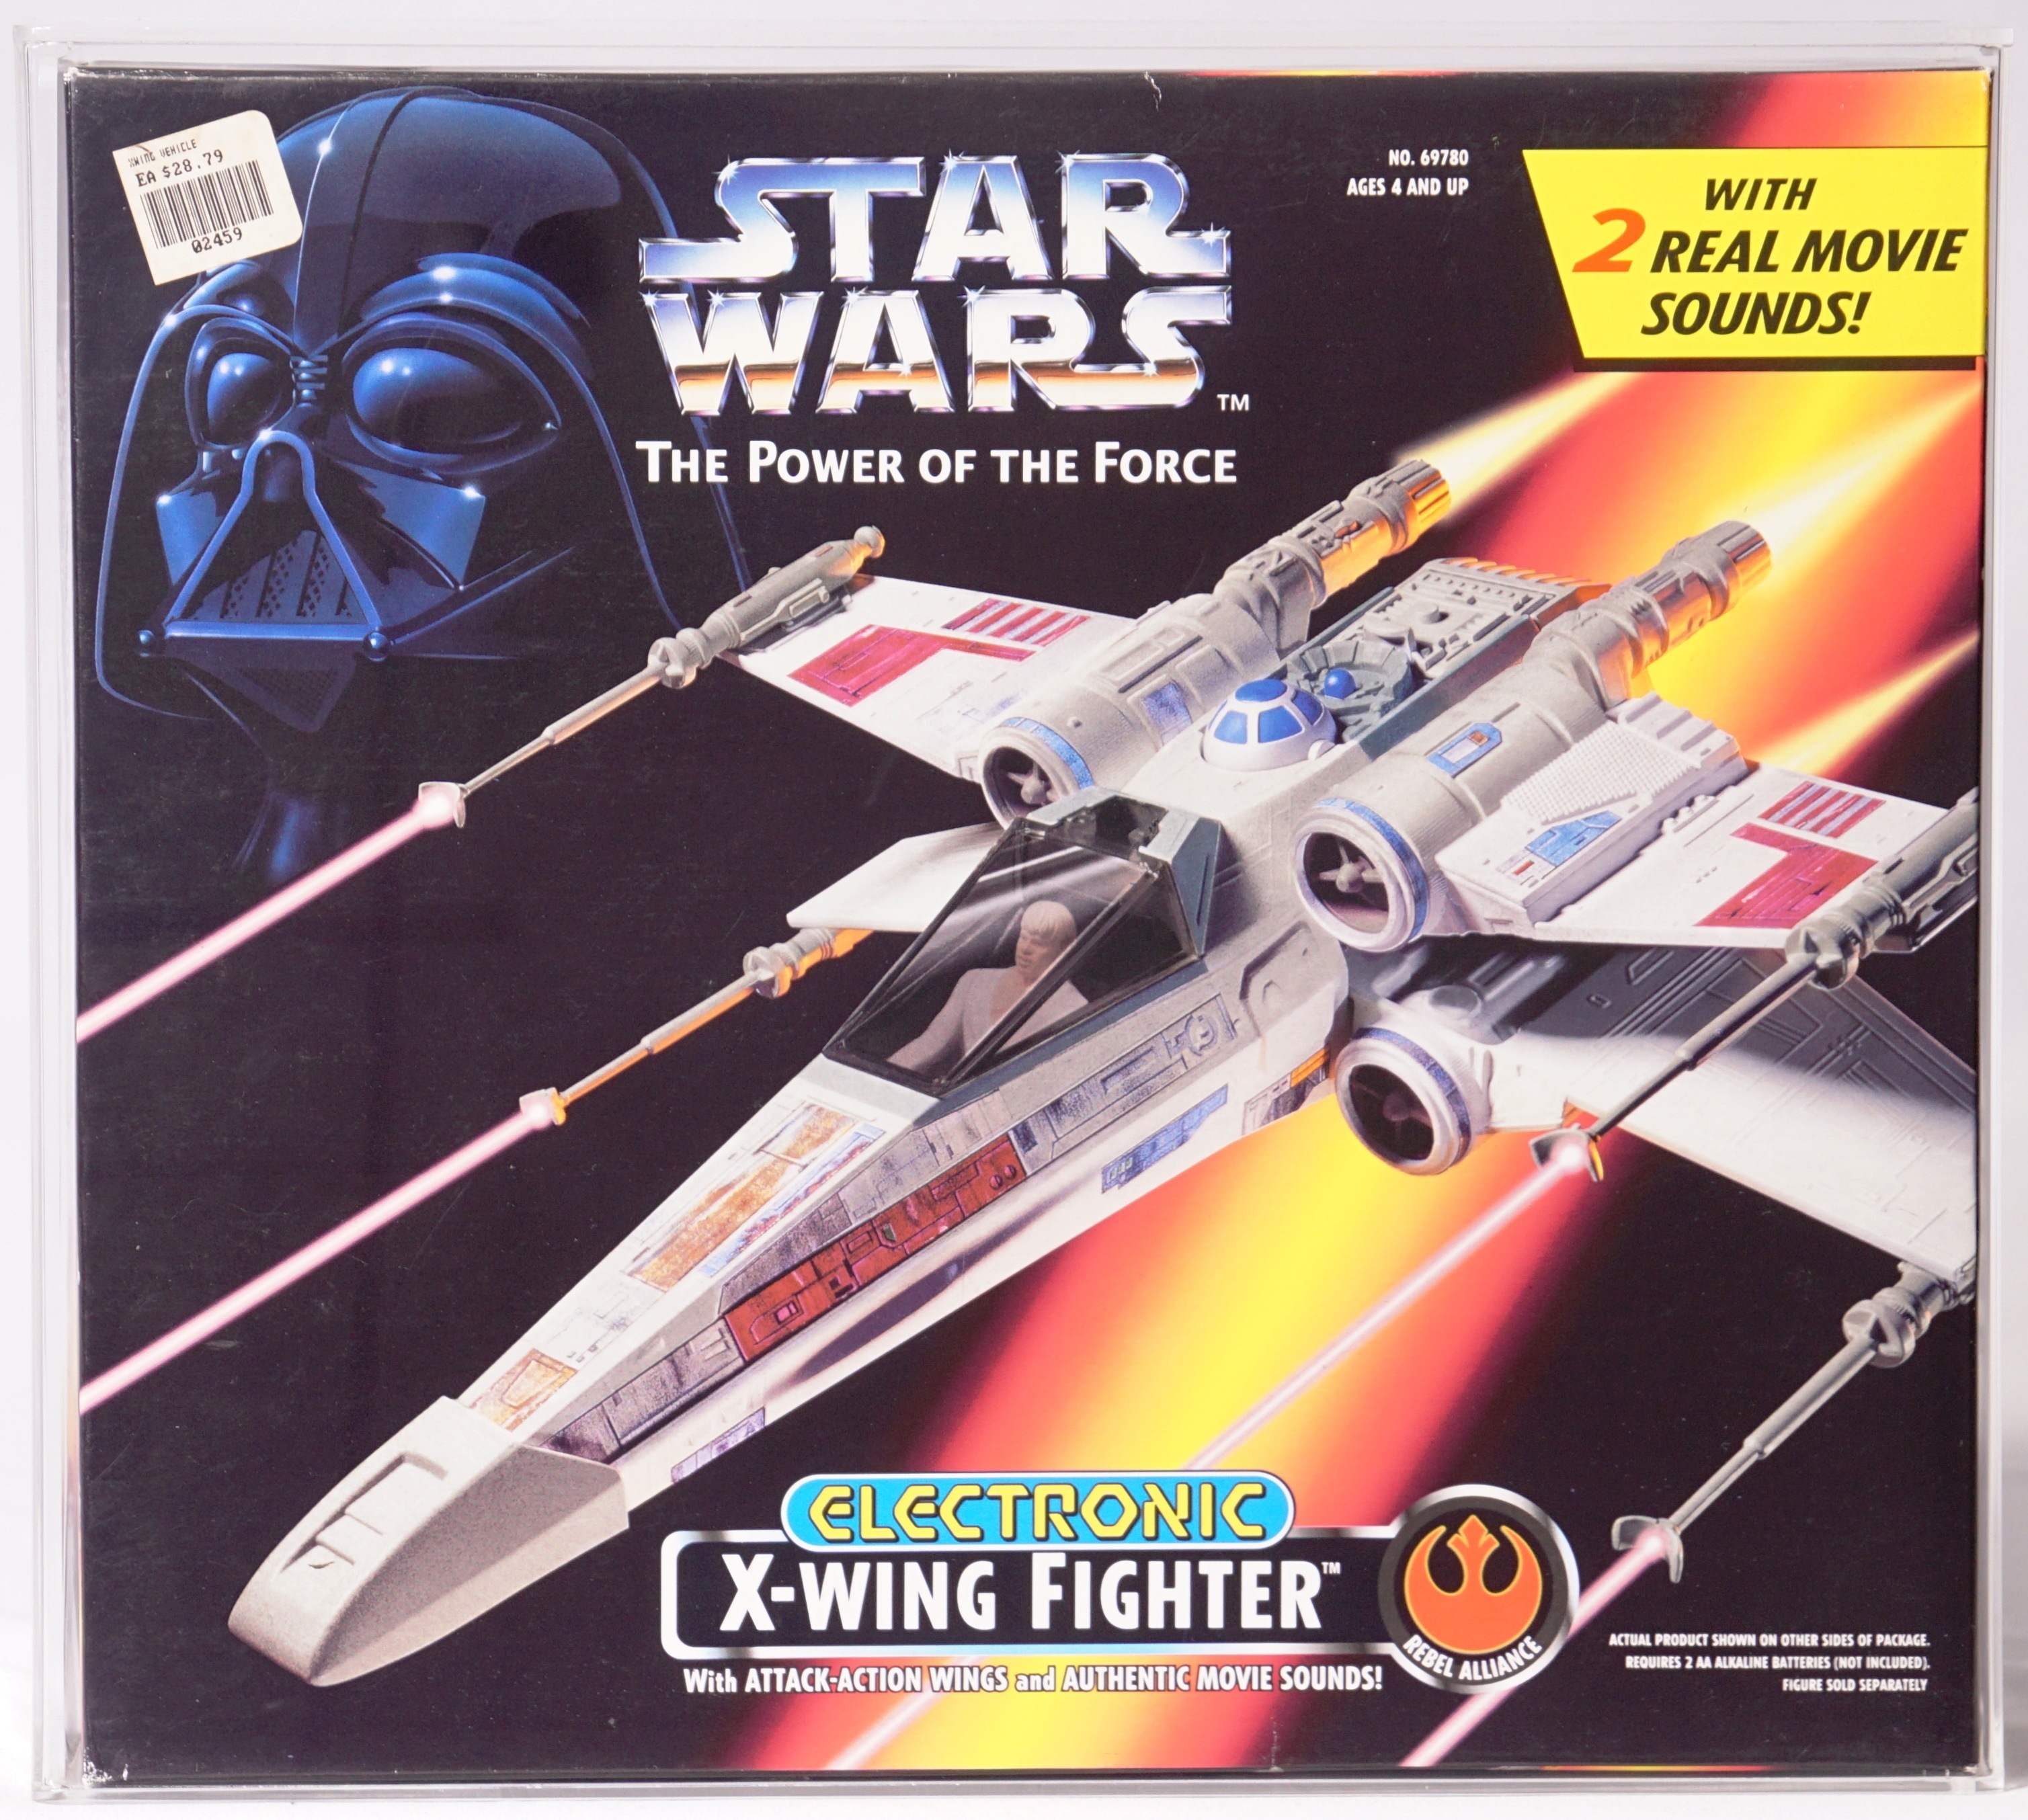 1995 Kenner Star Wars POTF Boxed Vehicle - Electronic X-Wing Fighter